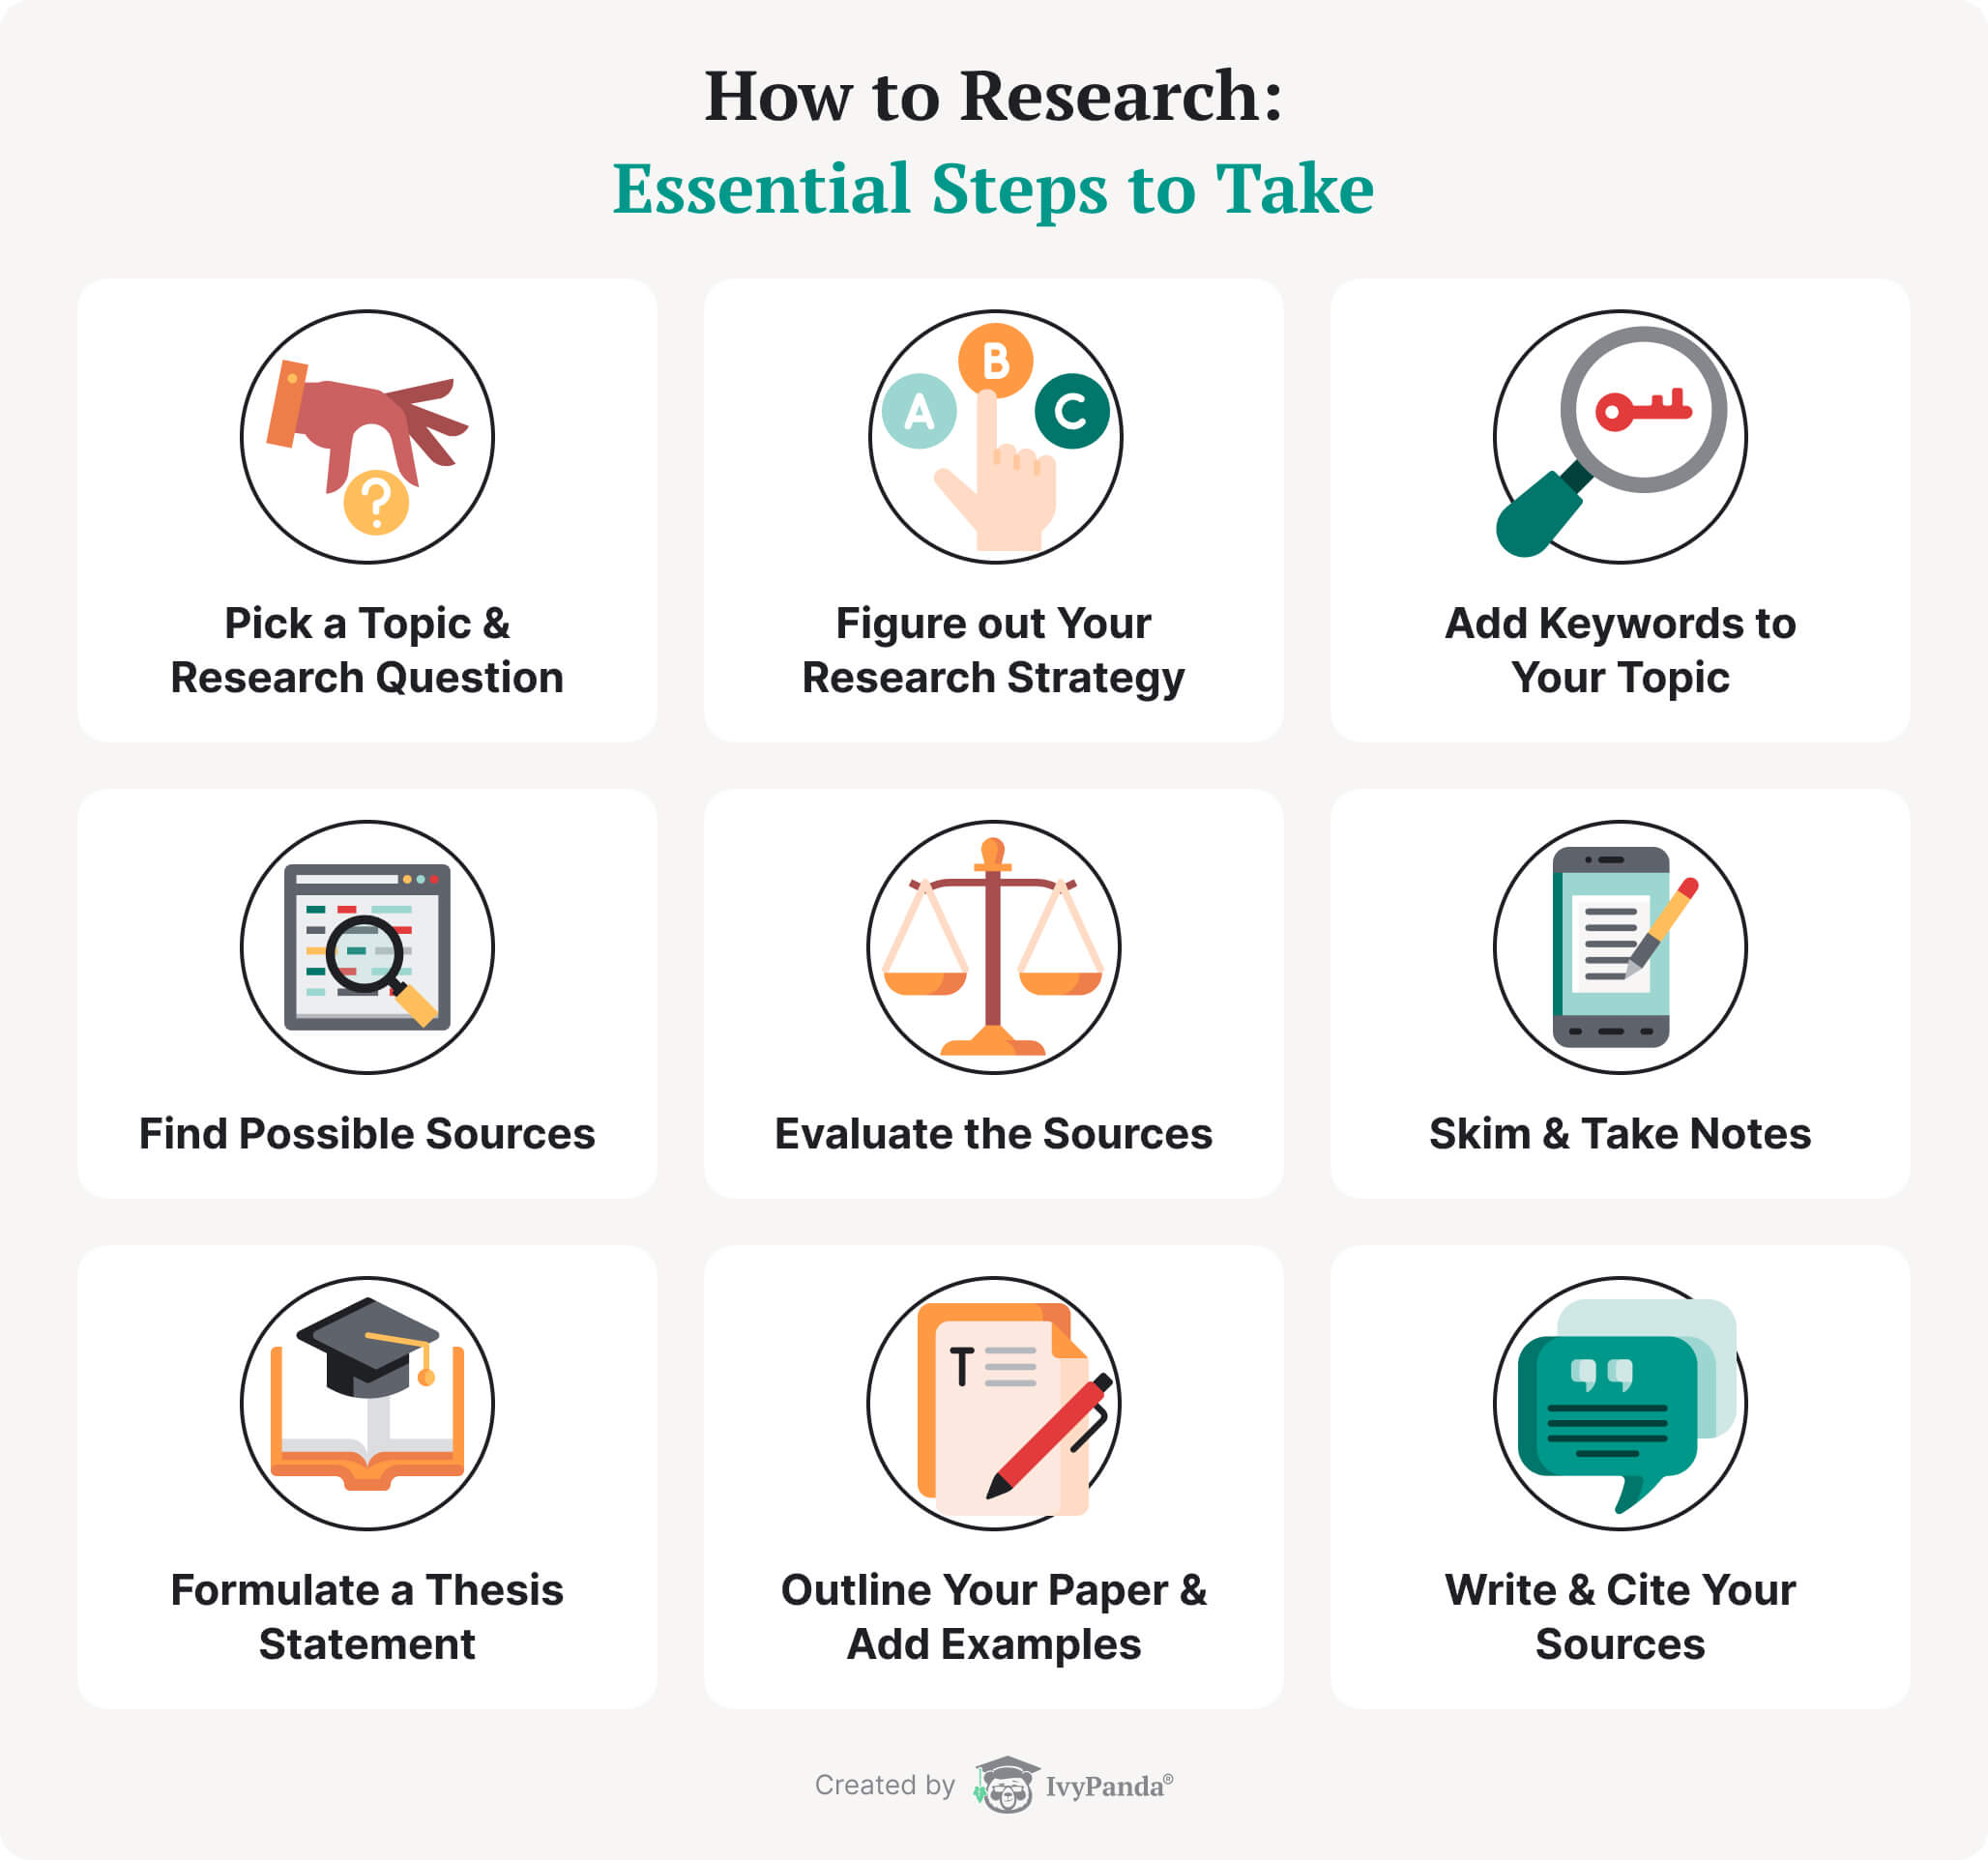 Essential steps to take in research.